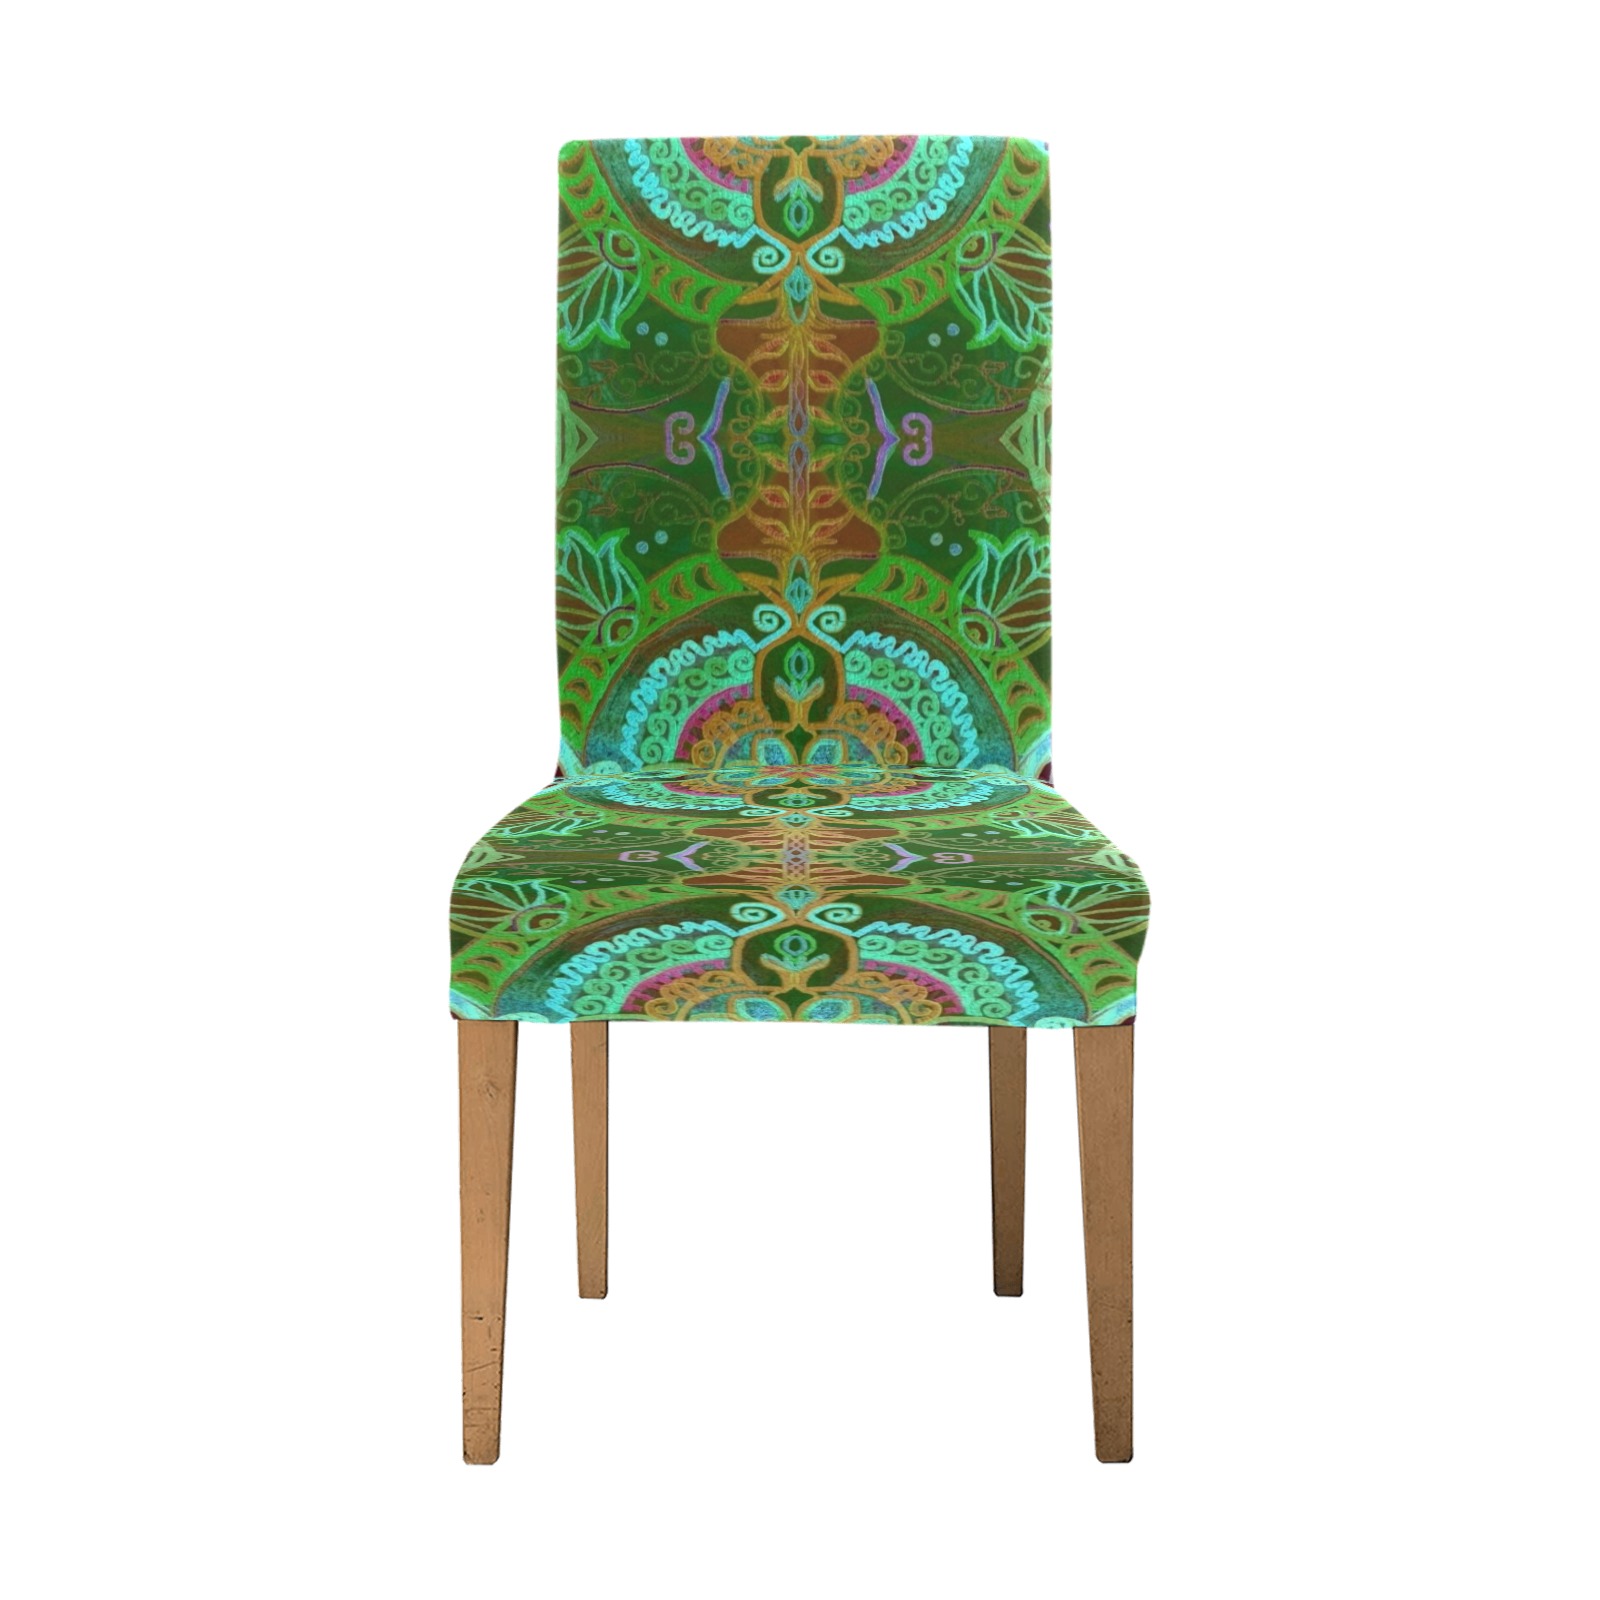 floralie-green Removable Dining Chair Cover